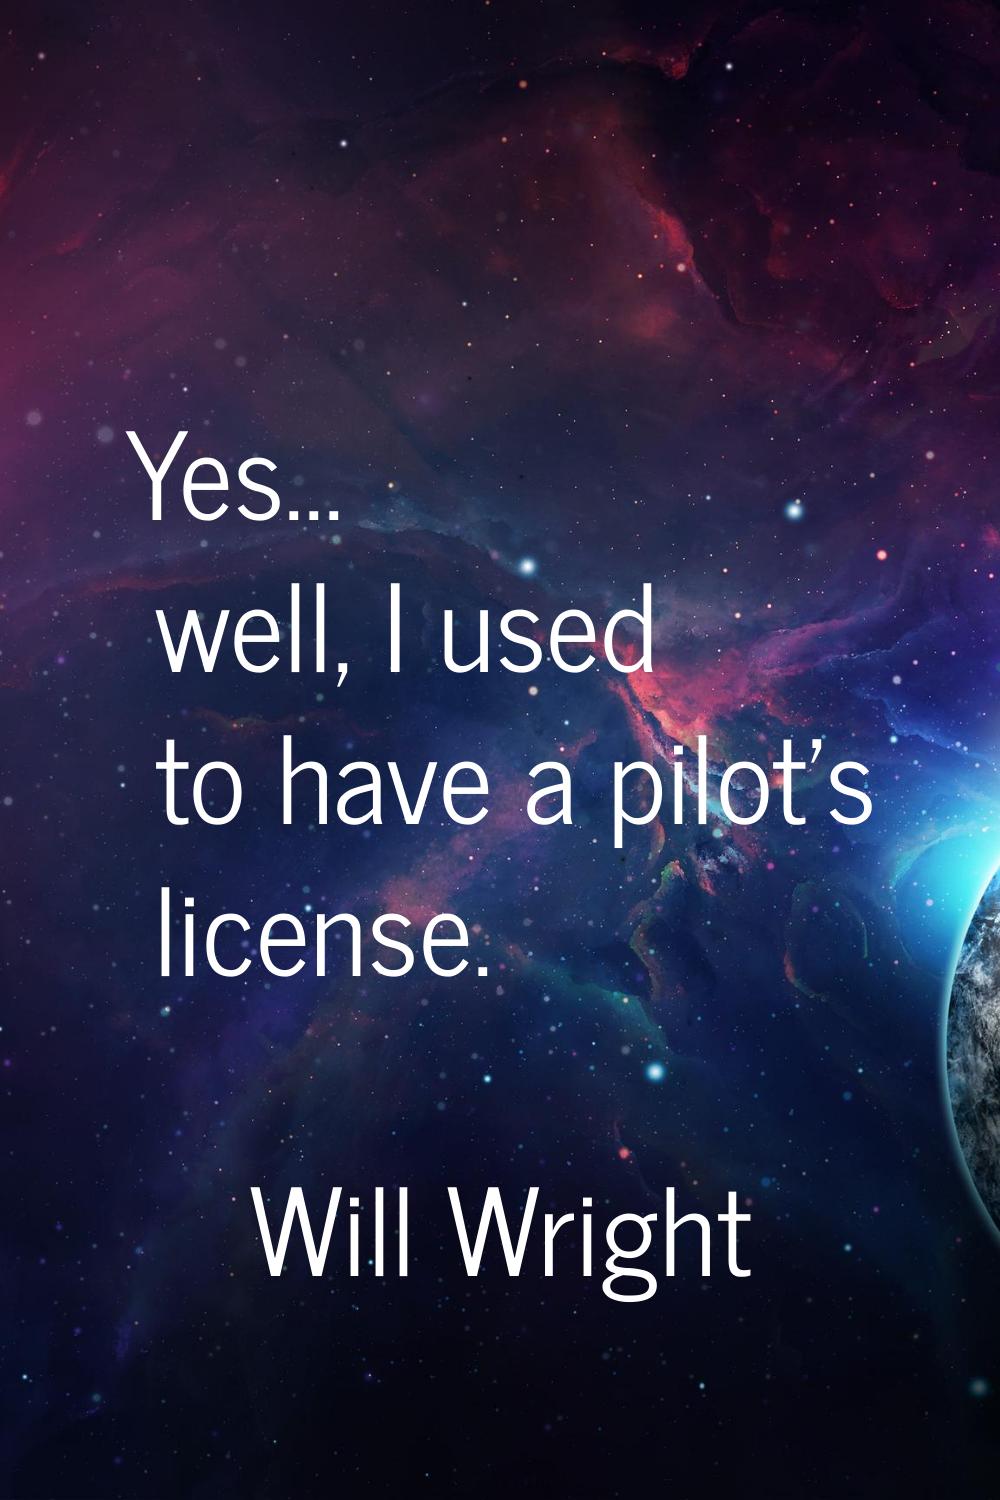 Yes... well, I used to have a pilot's license.